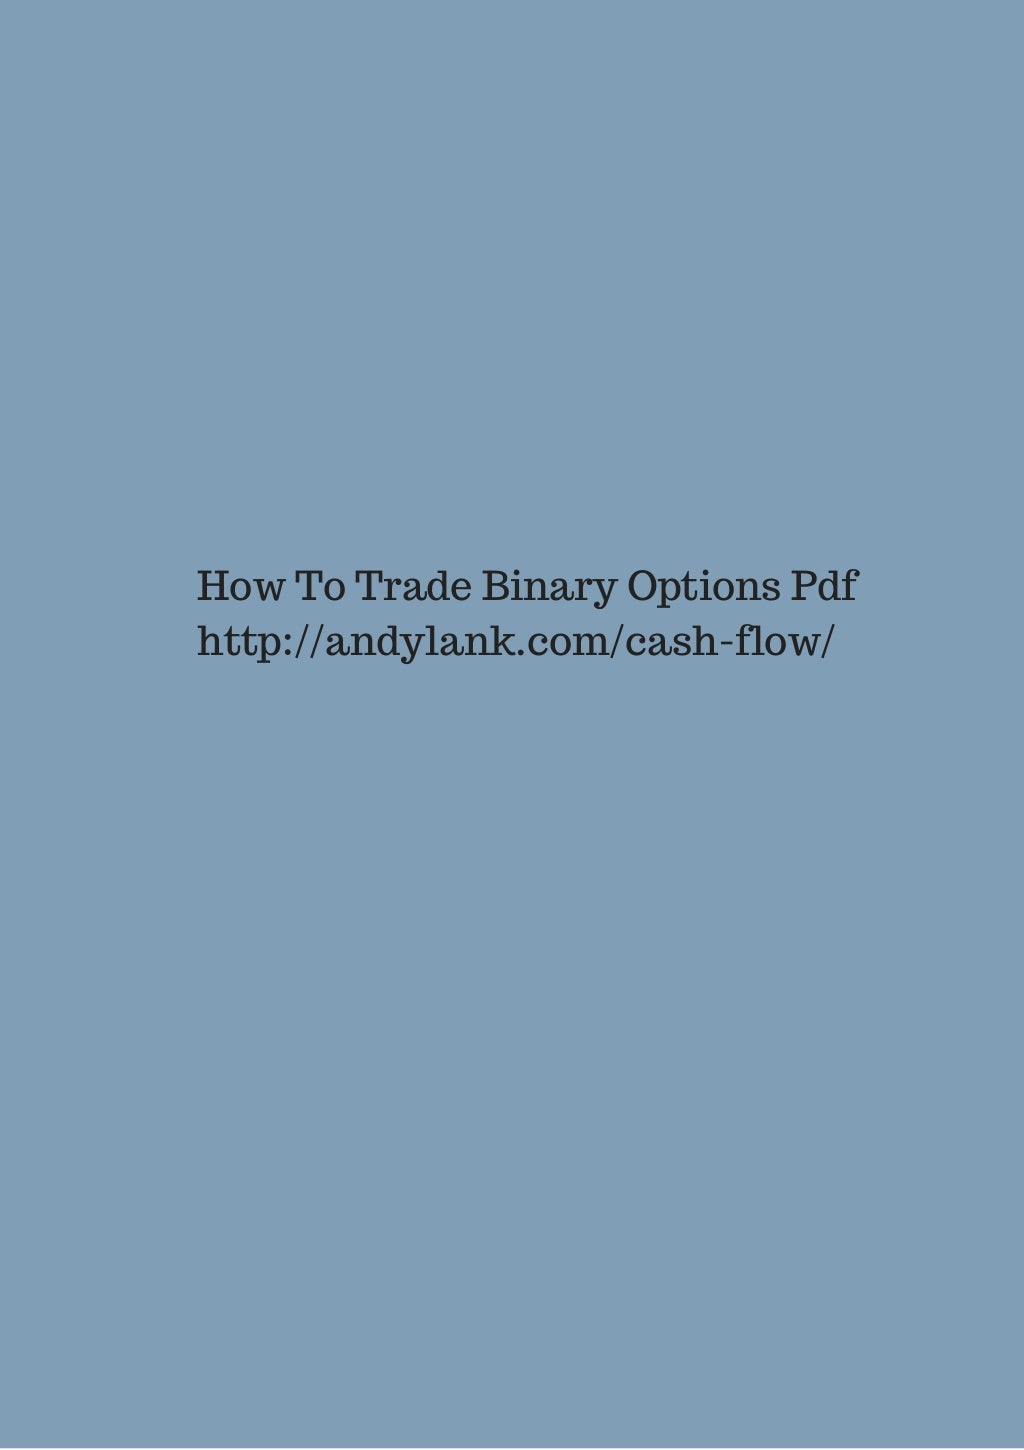 How to trade binary options successfully pdf